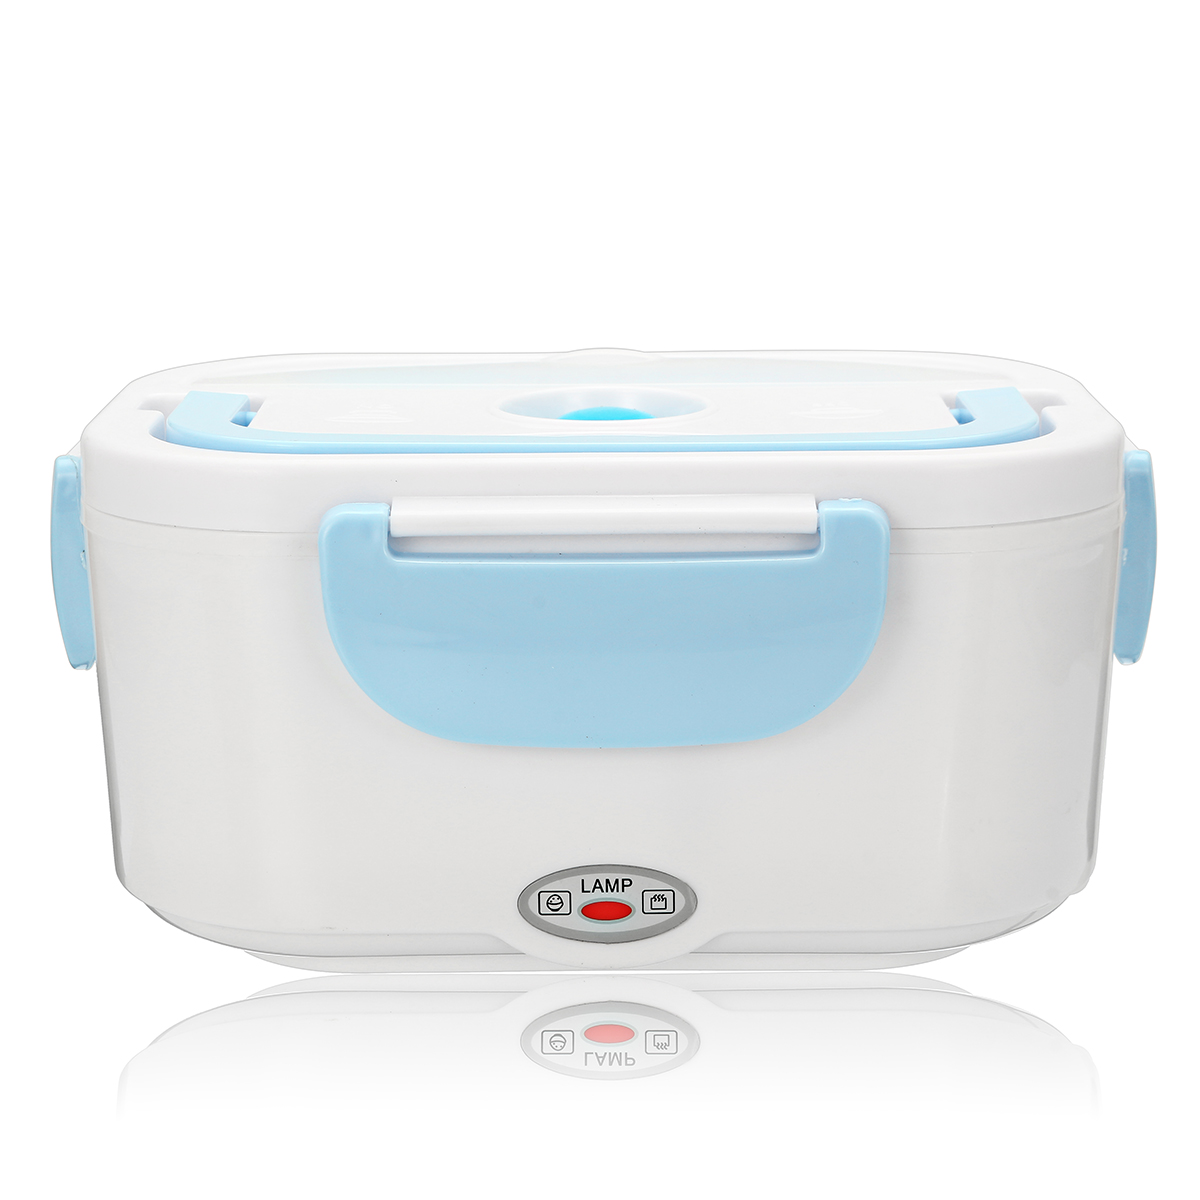 110V-Portable-Electric-Lunch-Box-Steamer-Rice-Cooker-Container-Heat-Preservation-1400151-2